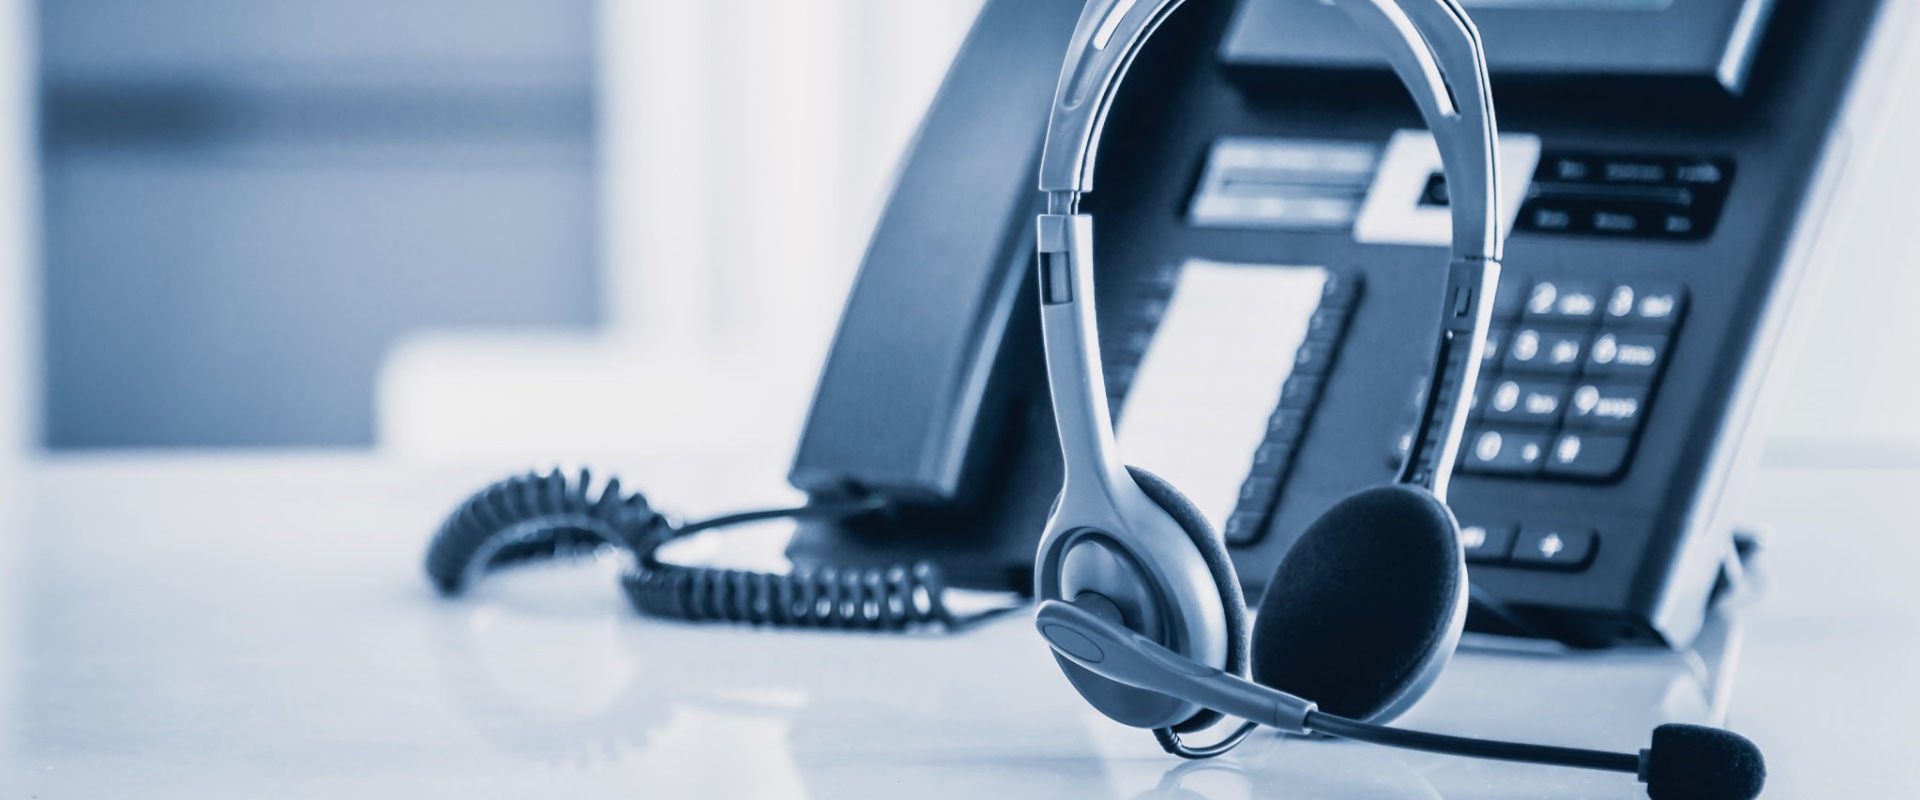 The Advantages and Limitations of Free VoIP Services